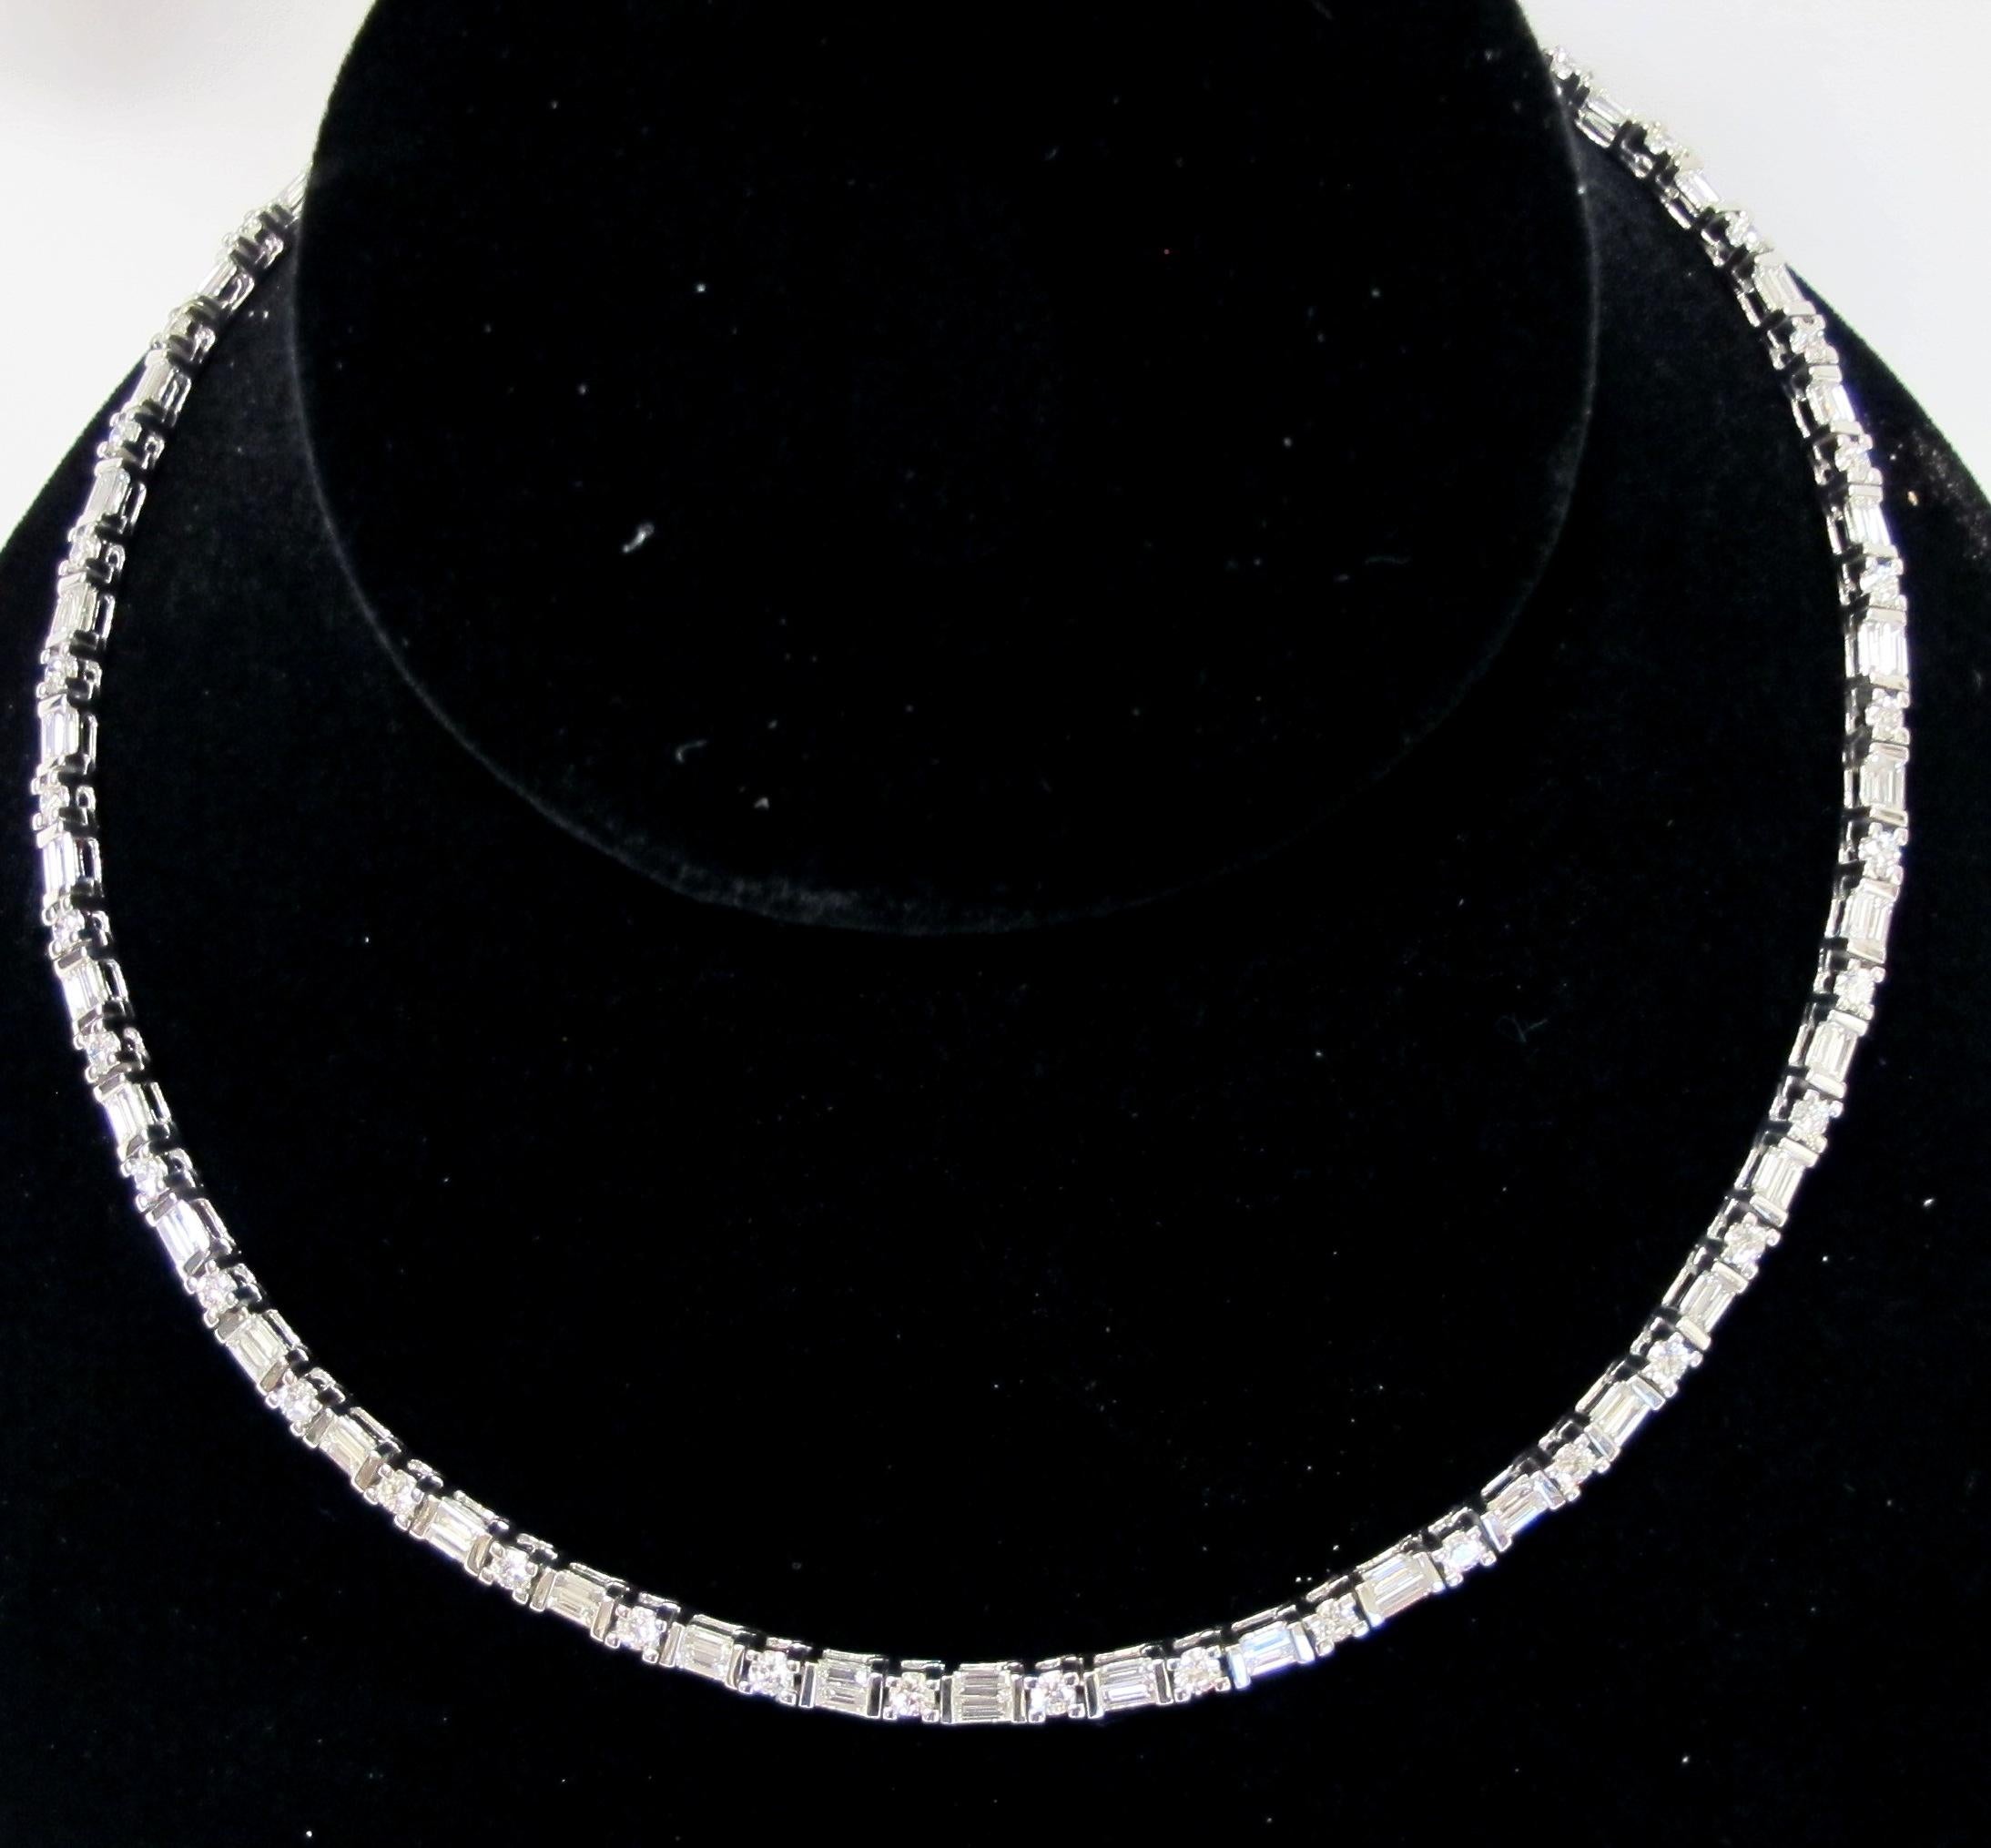 14 karat white gold necklace with 86 baguette cut diamonds and 43 round brilliant cut diamonds with a total diamond weight of 8.60 carats.  G-H in Color.  VS in clarity.  29 grams.